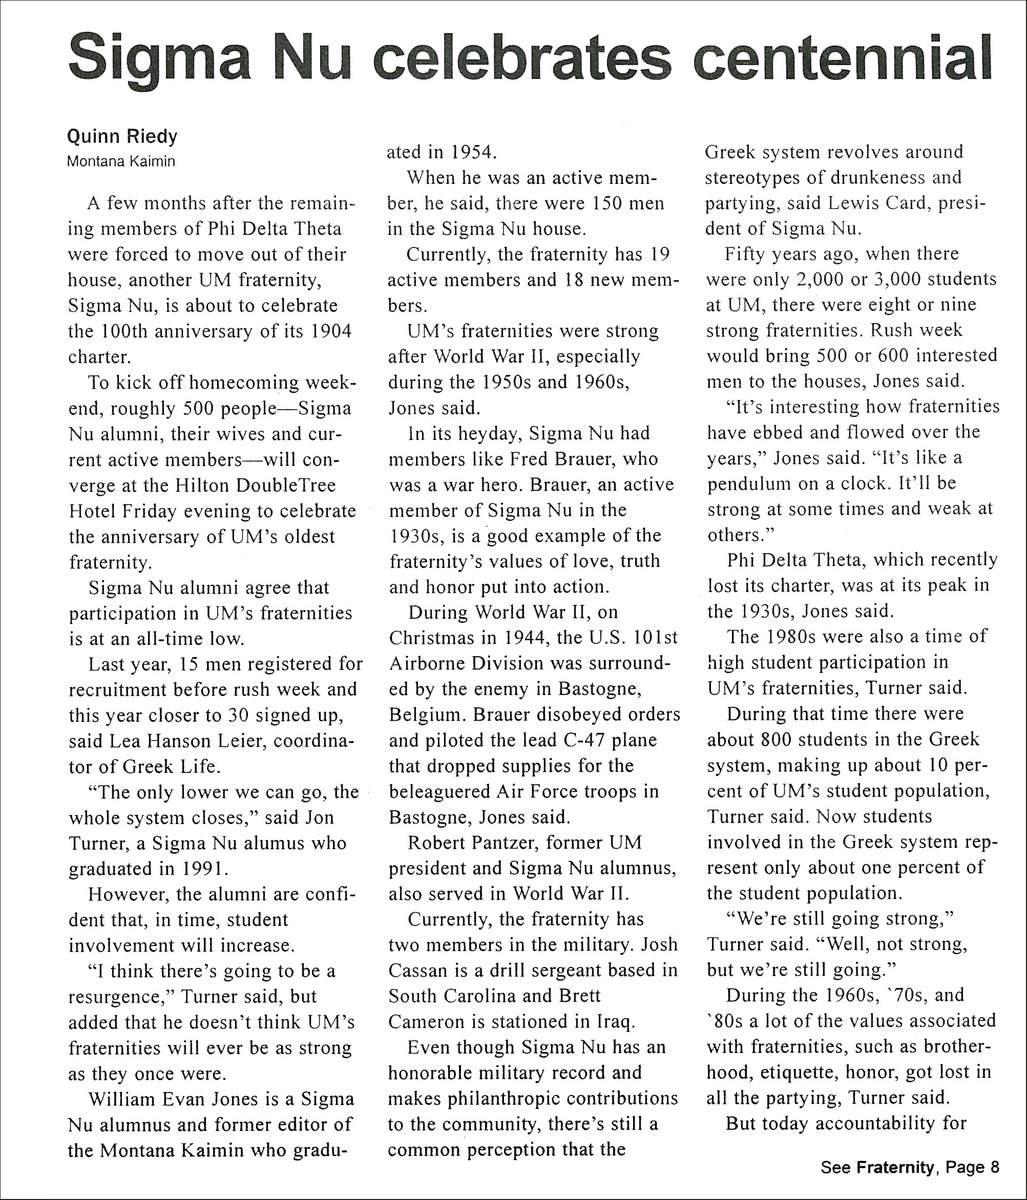 Sigma Nu celebrates centennial, page 1 and page 8<br />
